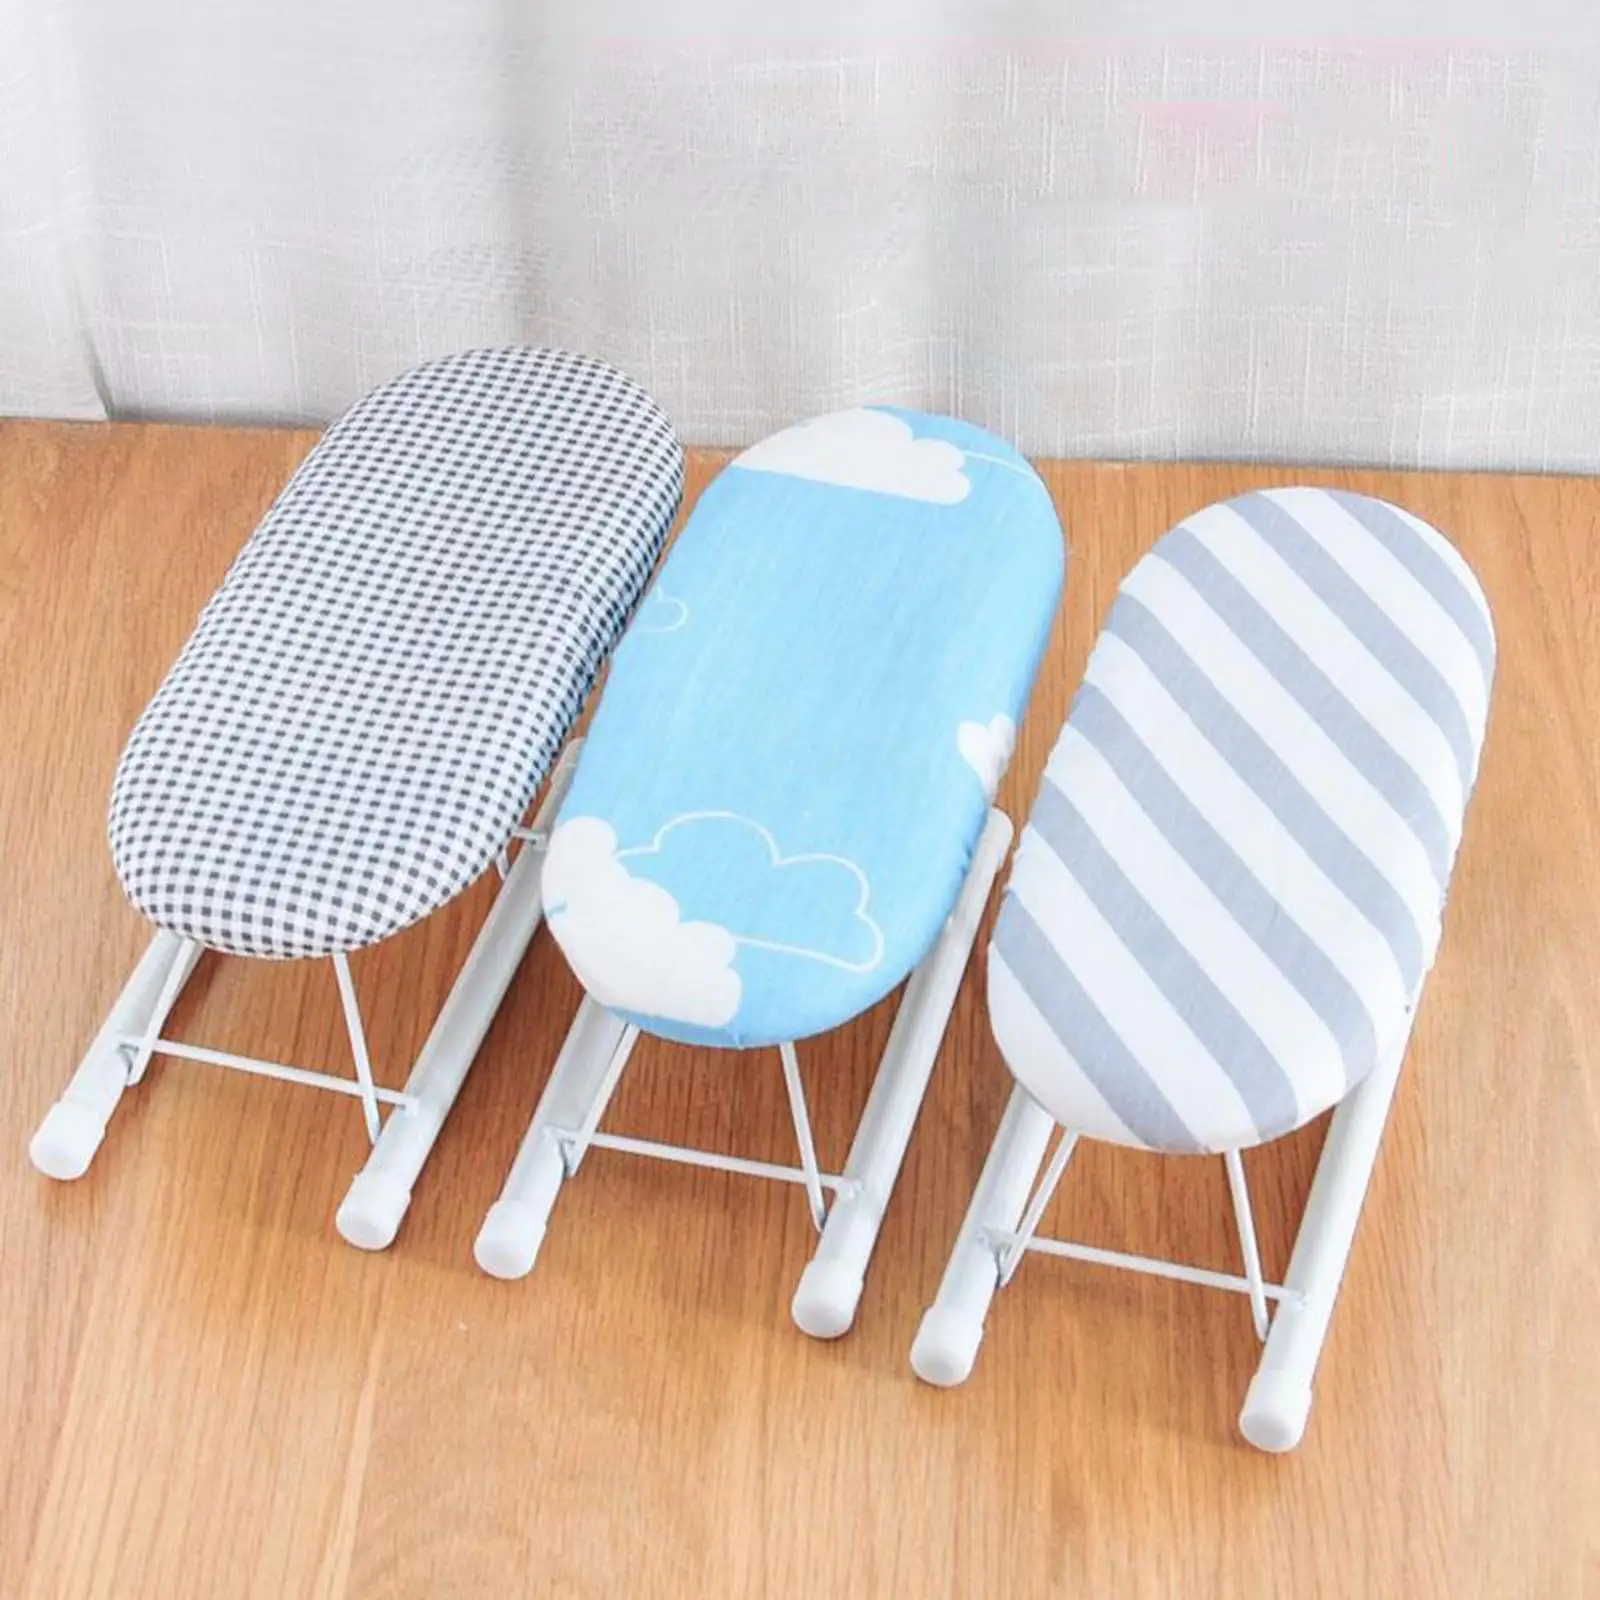 Portable Table Top Ironing Board Washable Removable for Small Spaces Travel Laundry